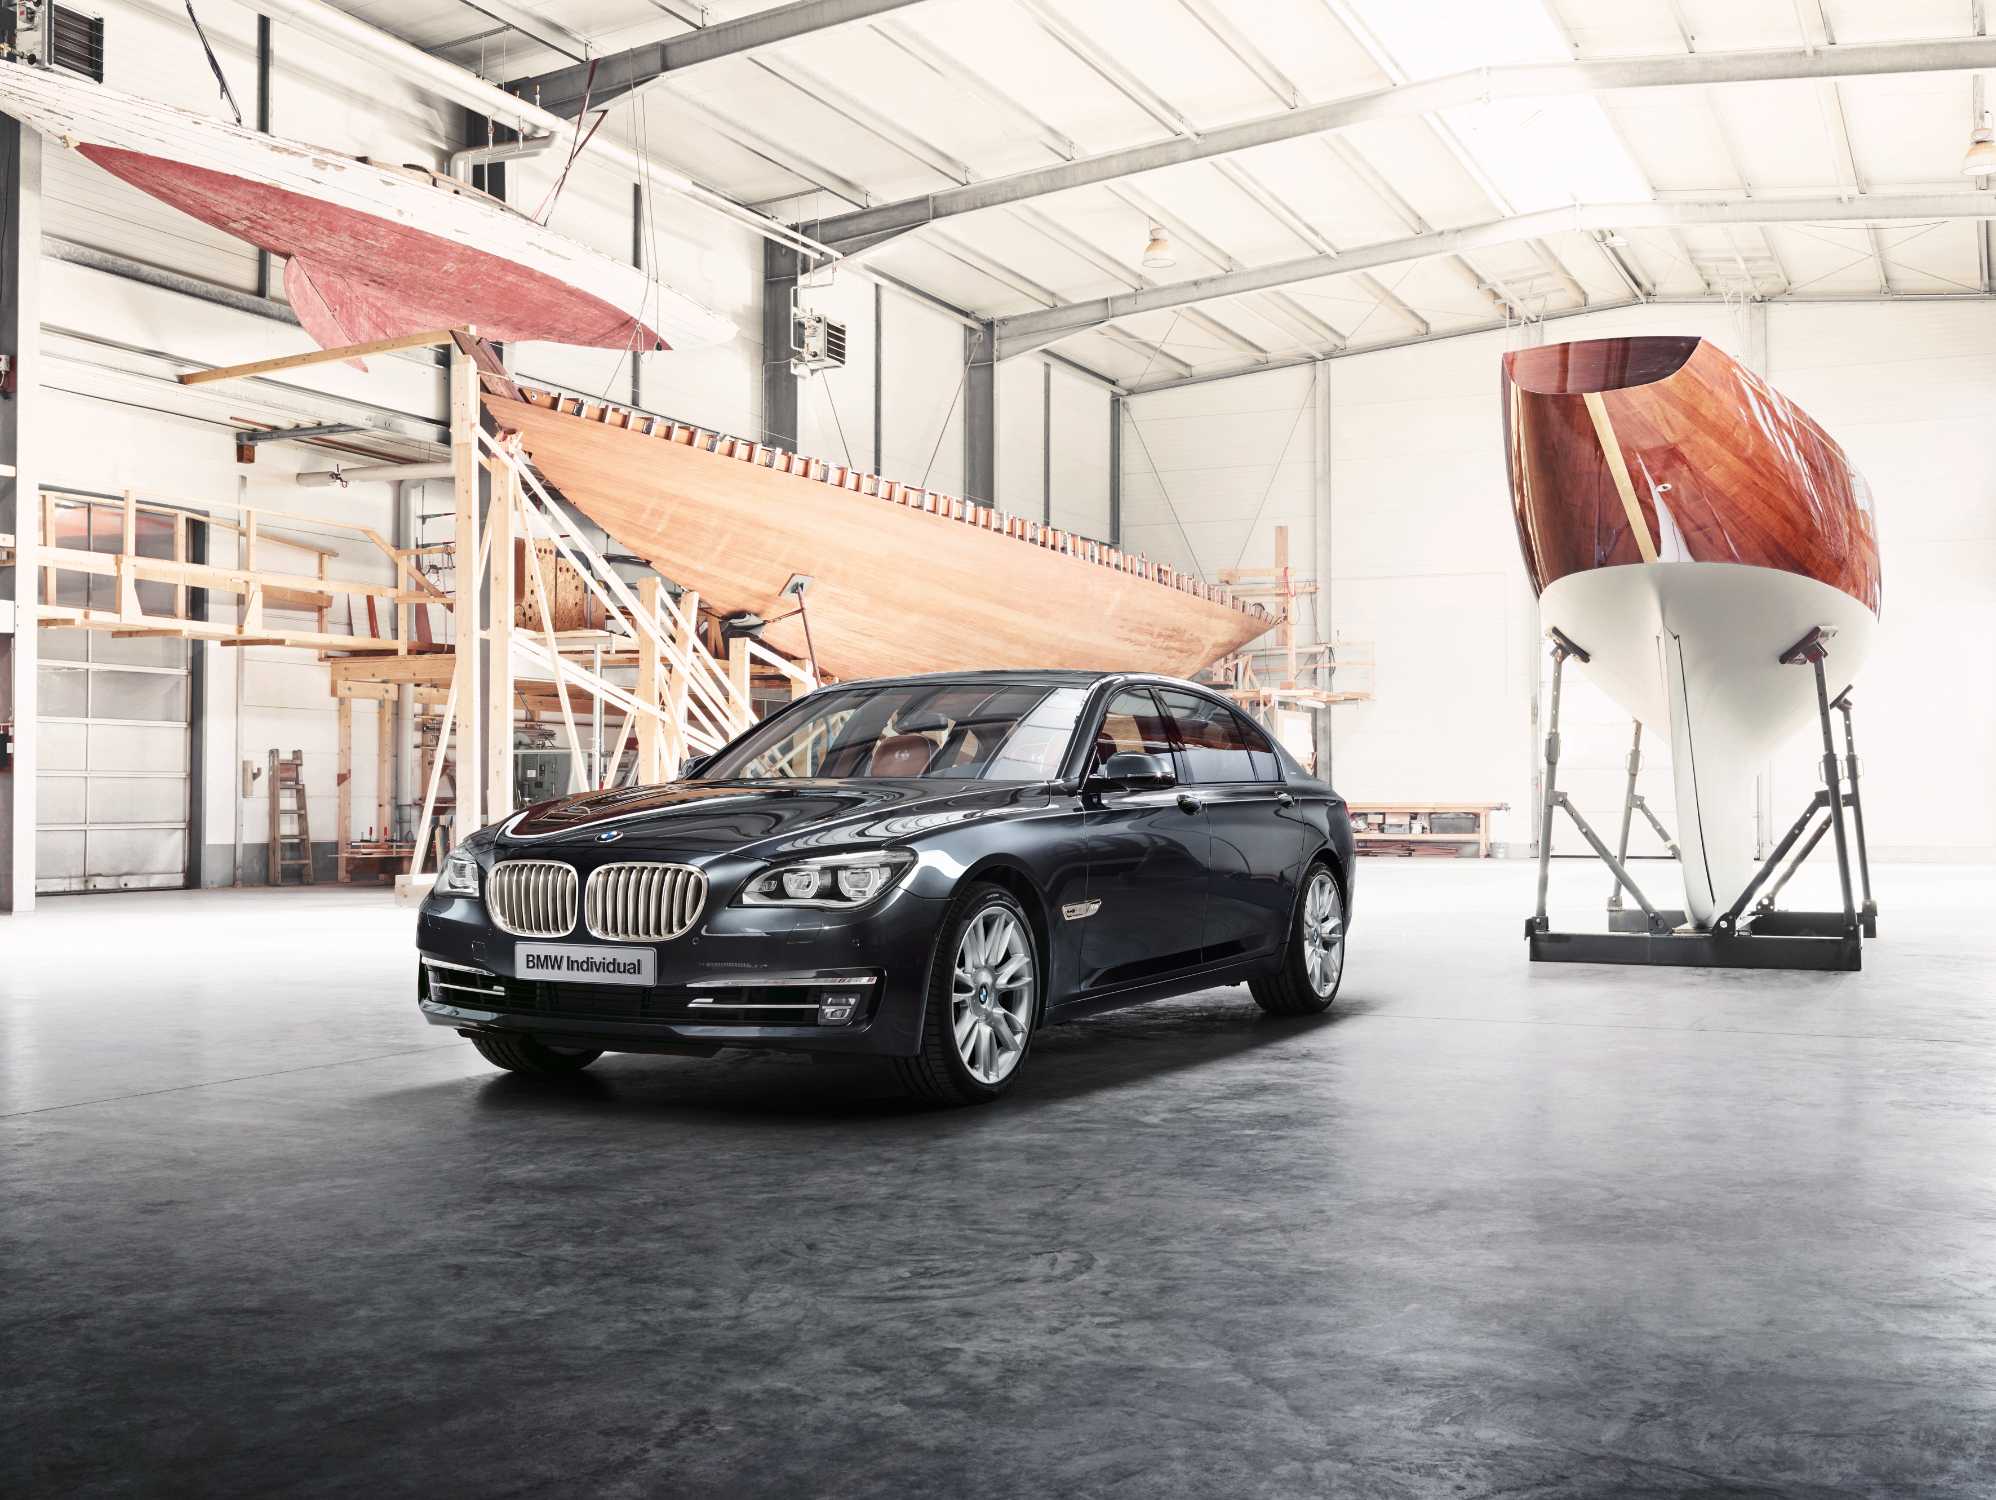 The BMW Individual 760Li Sterling inspired by ROBBE & BERKING.